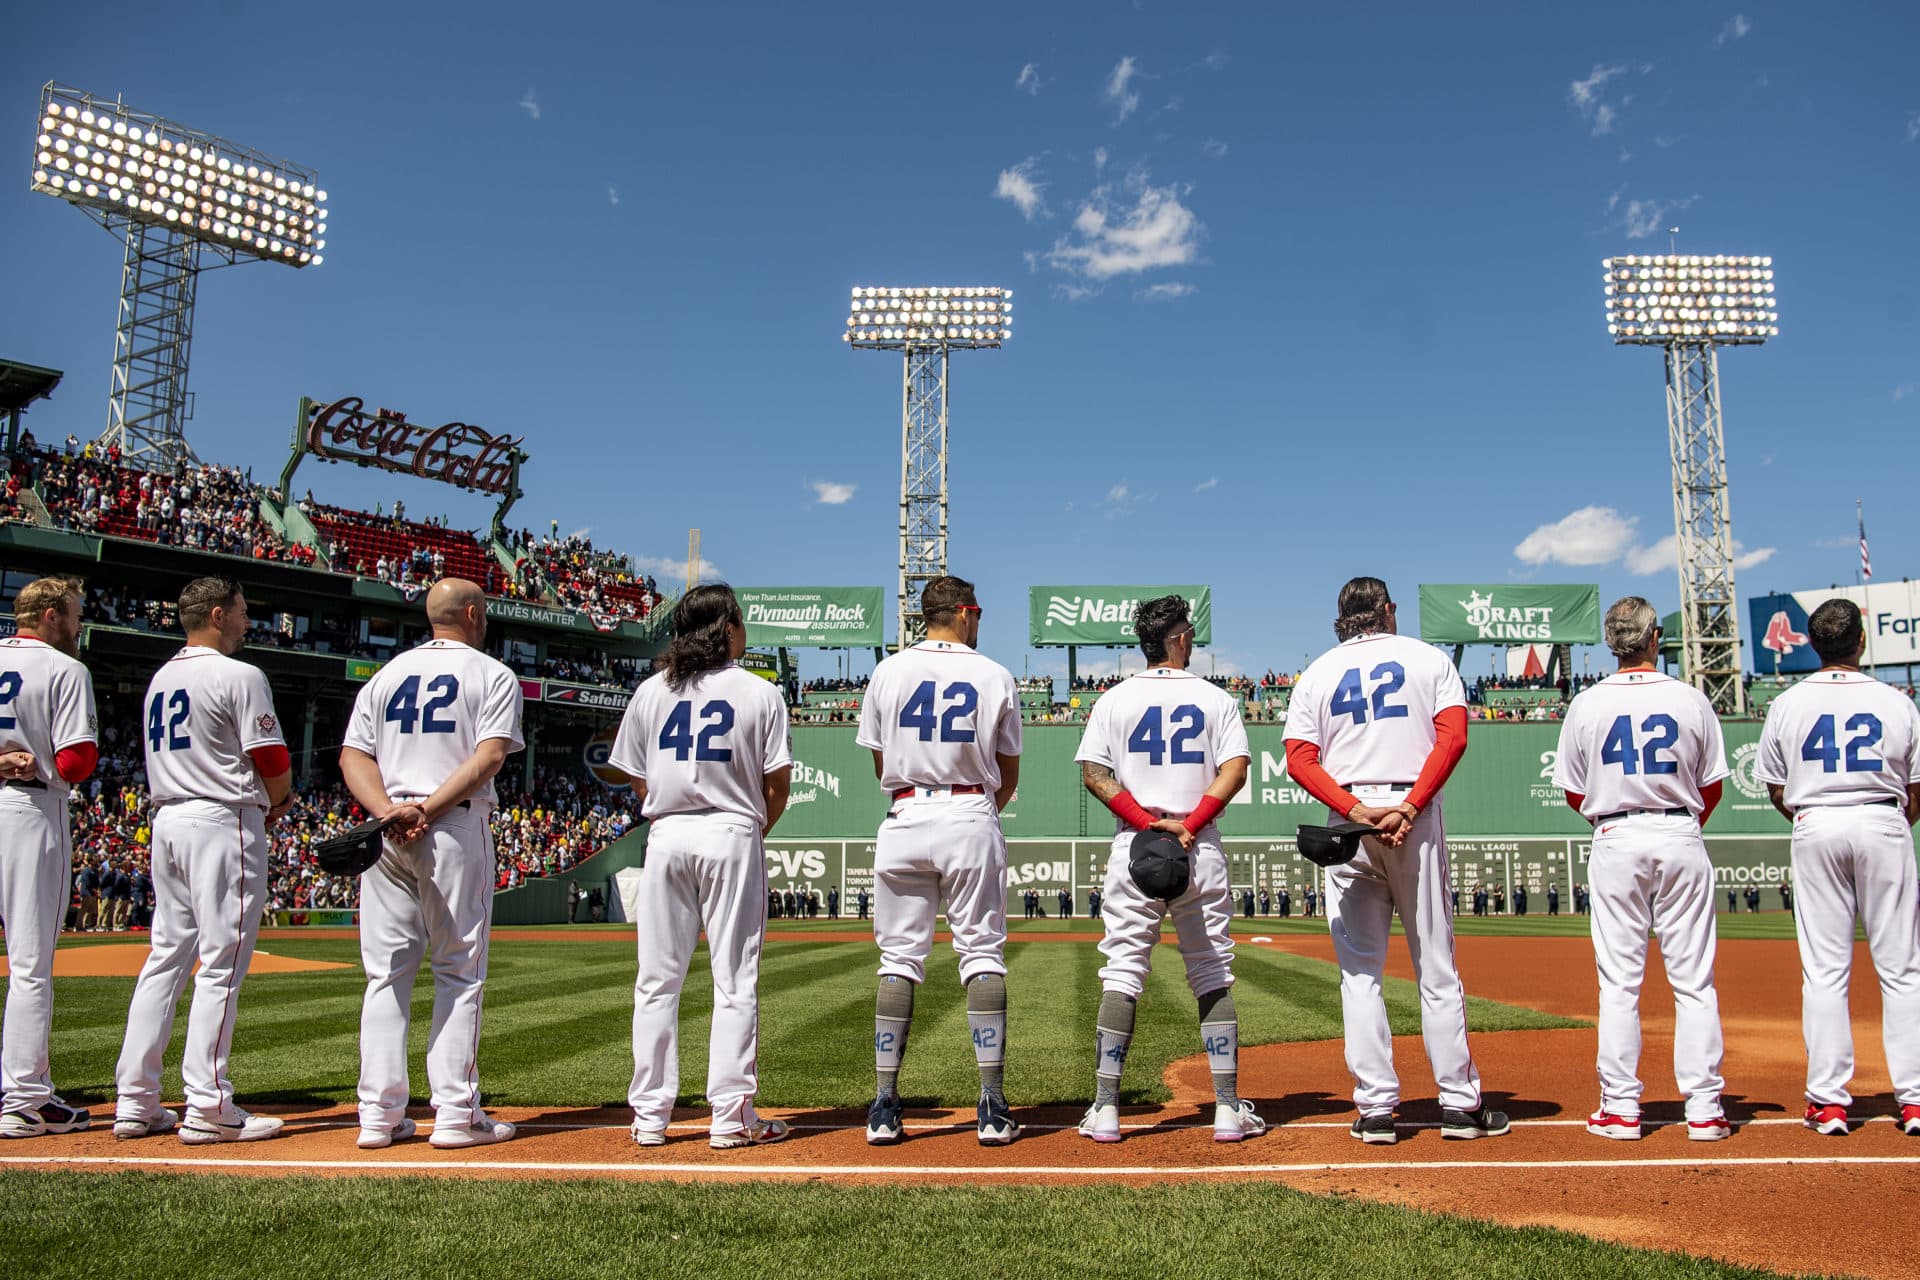 Fenway Park 2021 Opening Day preview